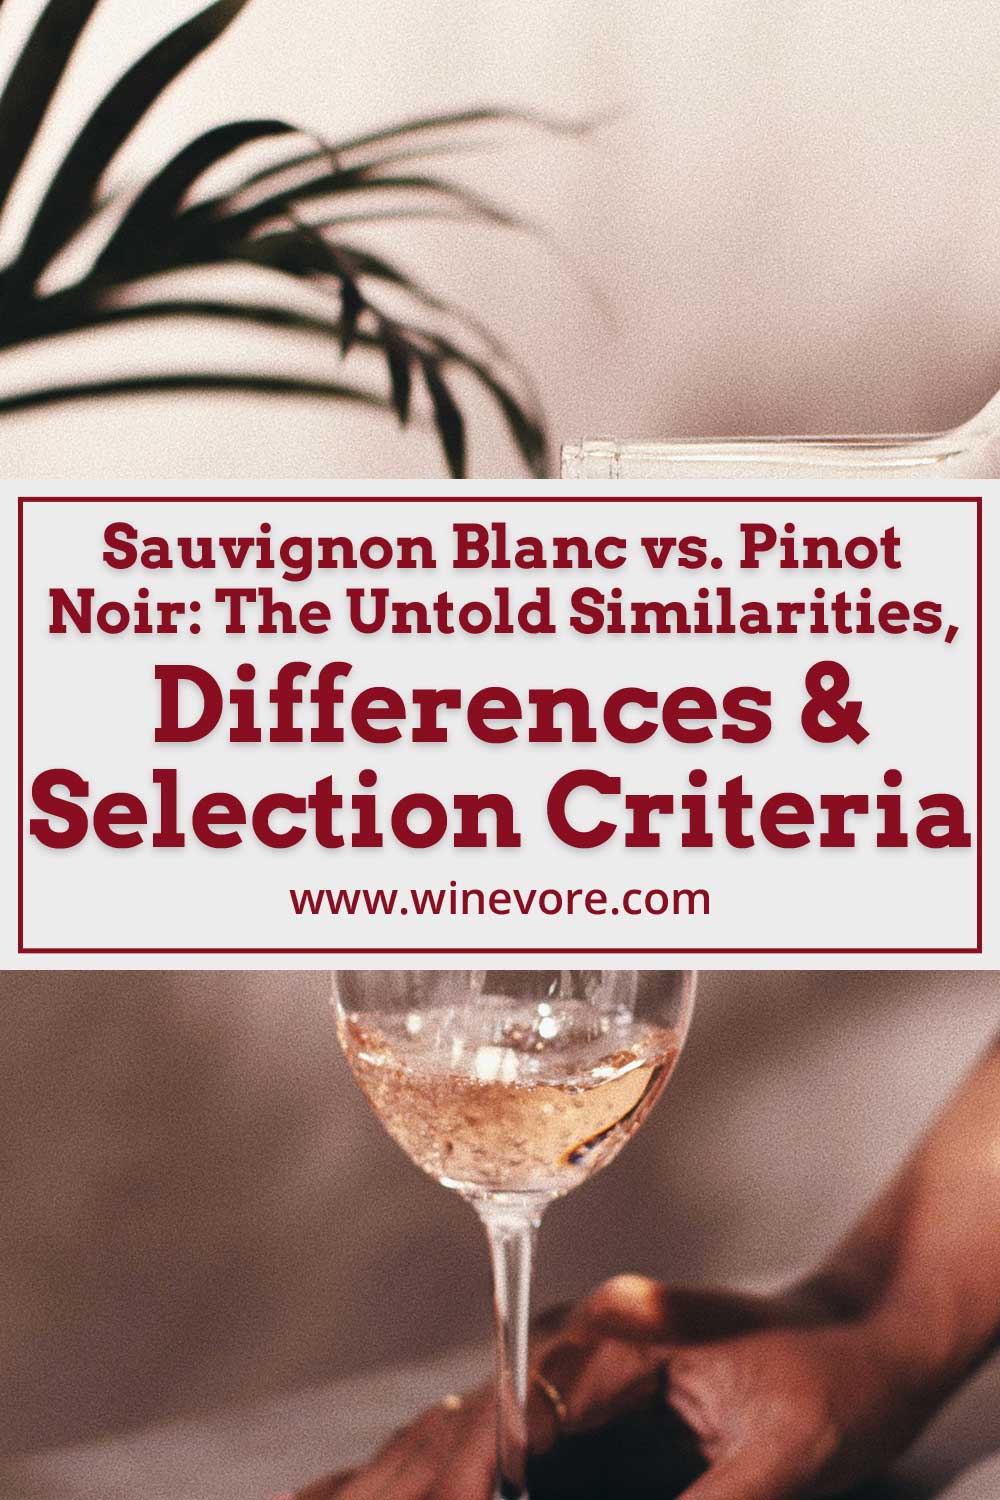 Person holding a wine glass in hand and pouring wine in it - Sauvignon Blanc vs. Pinot Noir: The Untold Similarities, Differences & Selection Criteria.